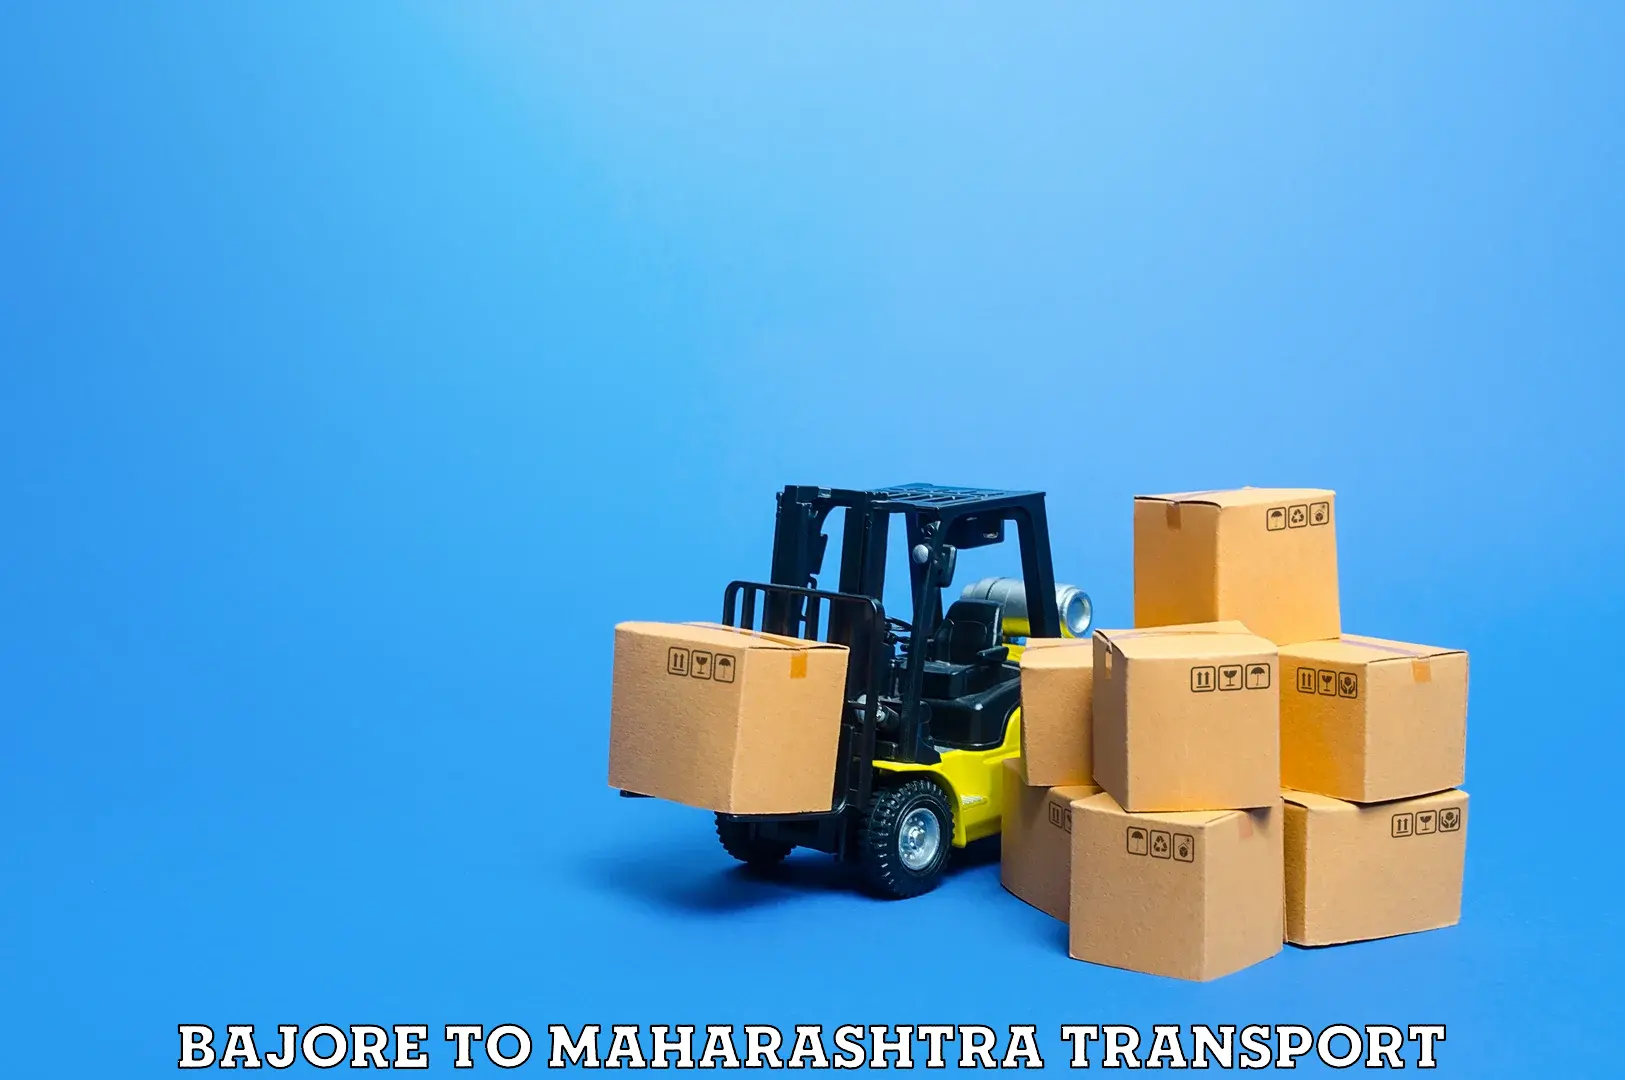 Truck transport companies in India Bajore to Morshi